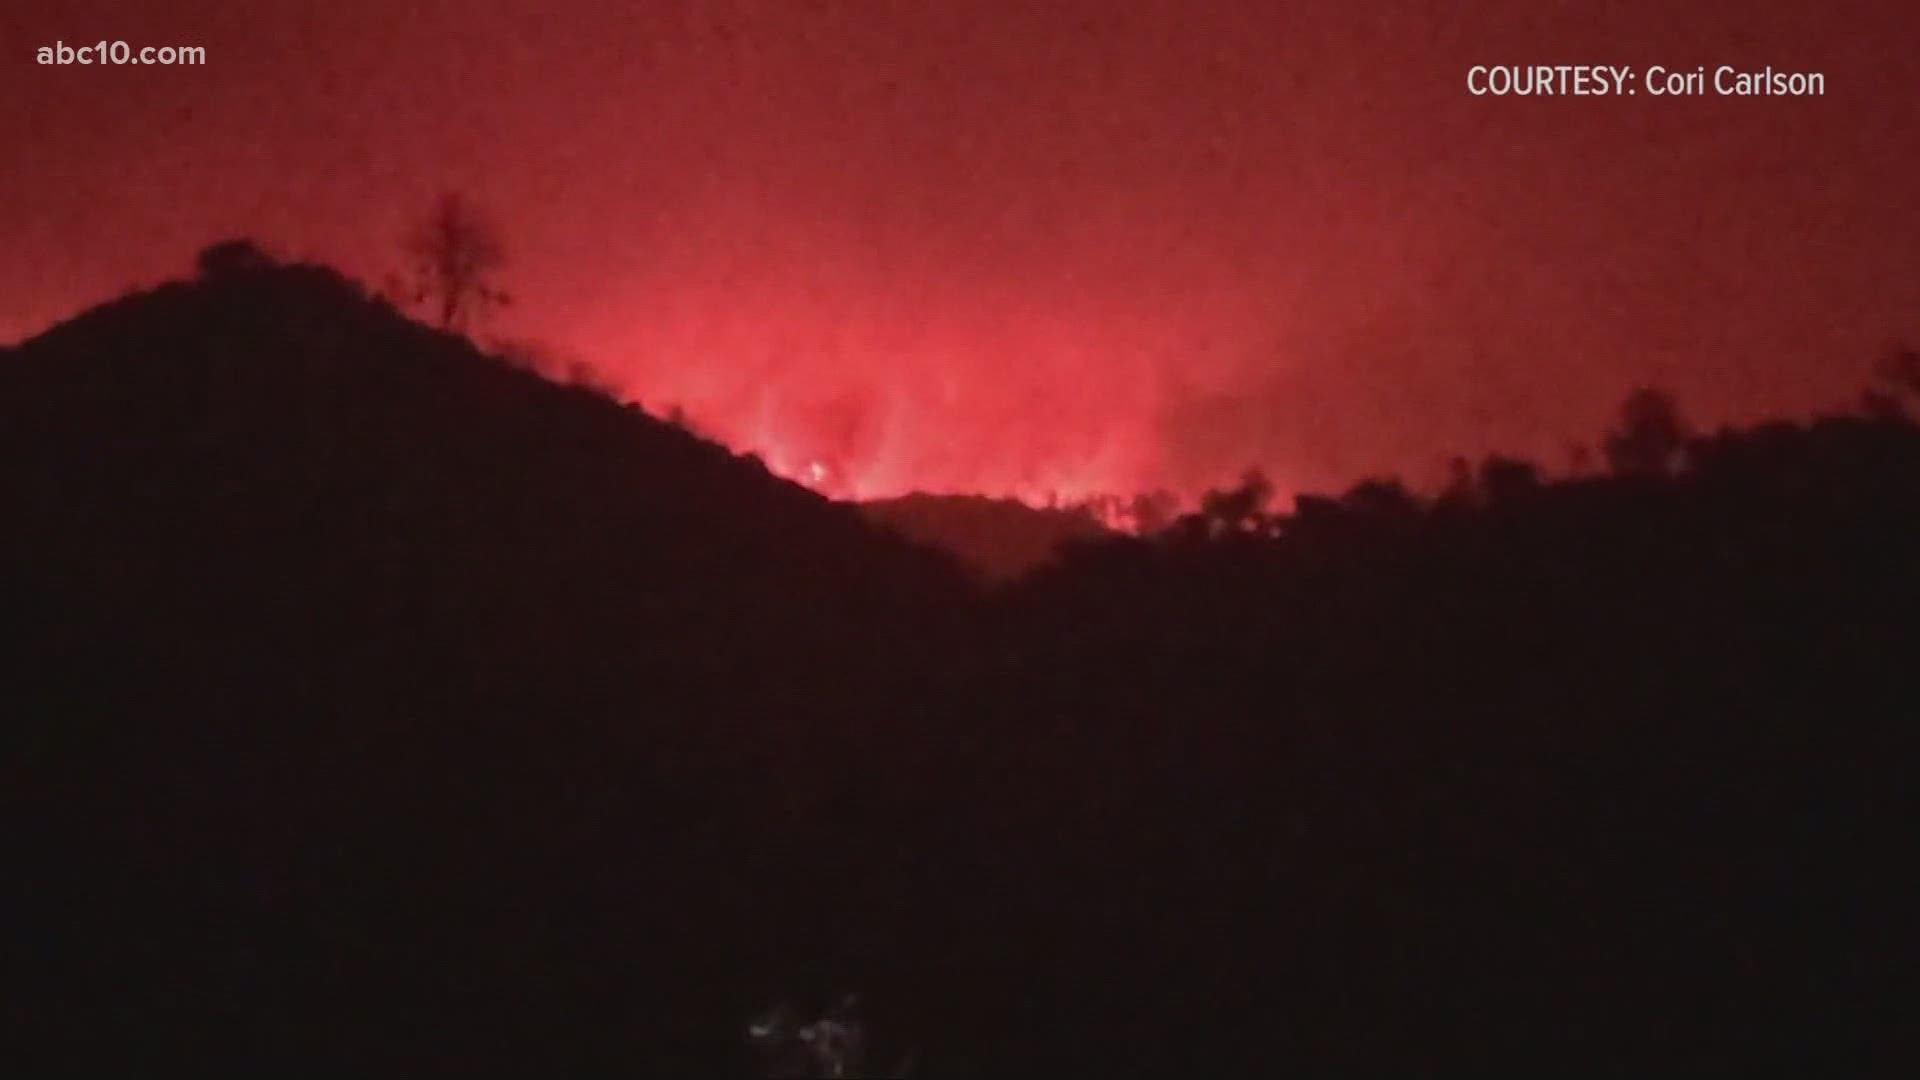 A fire marshal told ABC10 they should evacuate when they are told instead of defending their homes from wildfires.